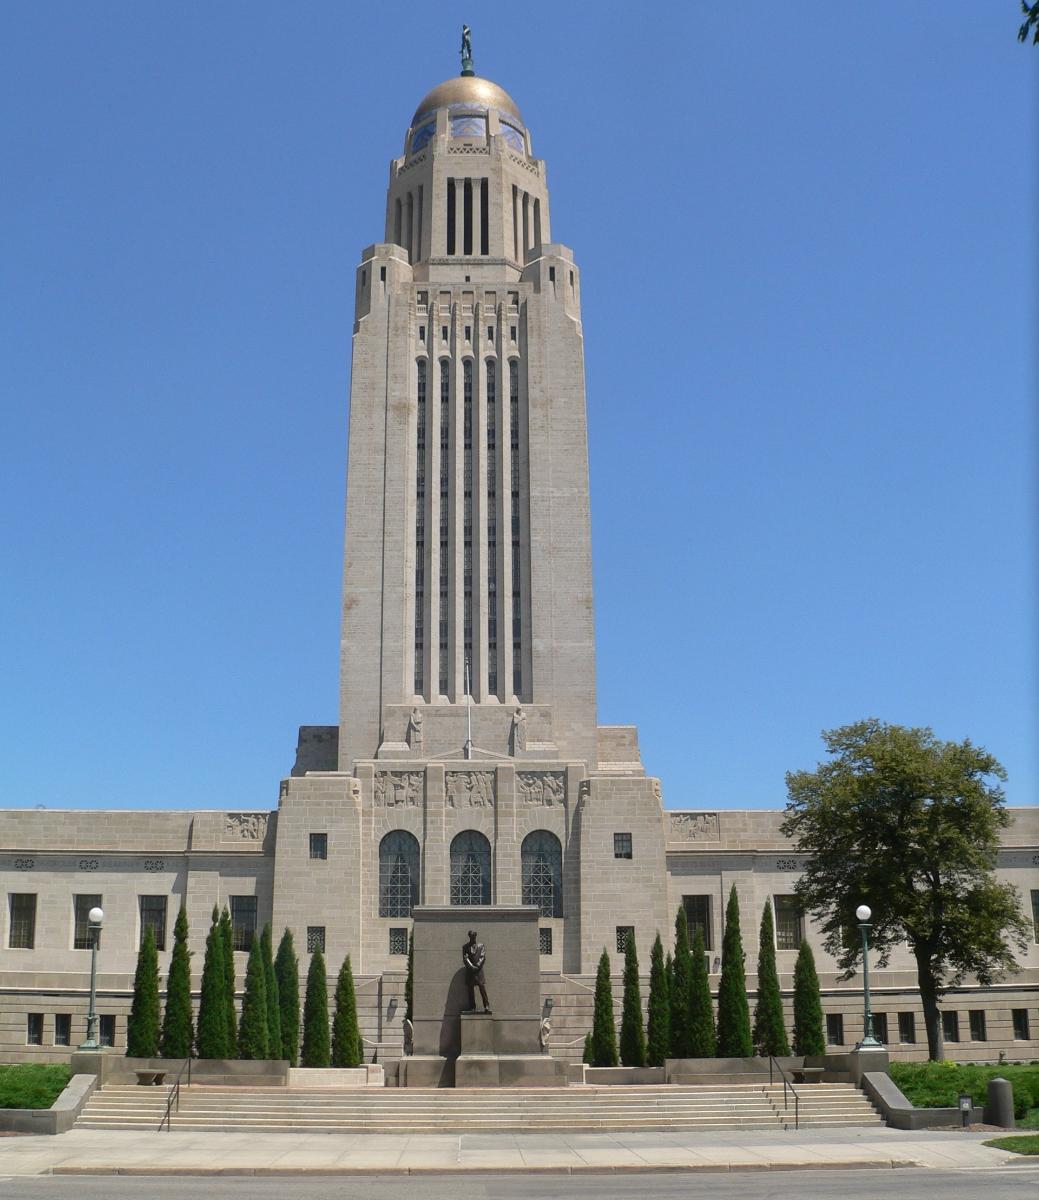 Nebraska State Capitol in Lincoln, Nebraska Seen from the west, looking east along Lincoln Mall from between 13th and 14th Streets. At the lower center of the photo is Daniel Chester French's sculpture of Abraham Lincoln.